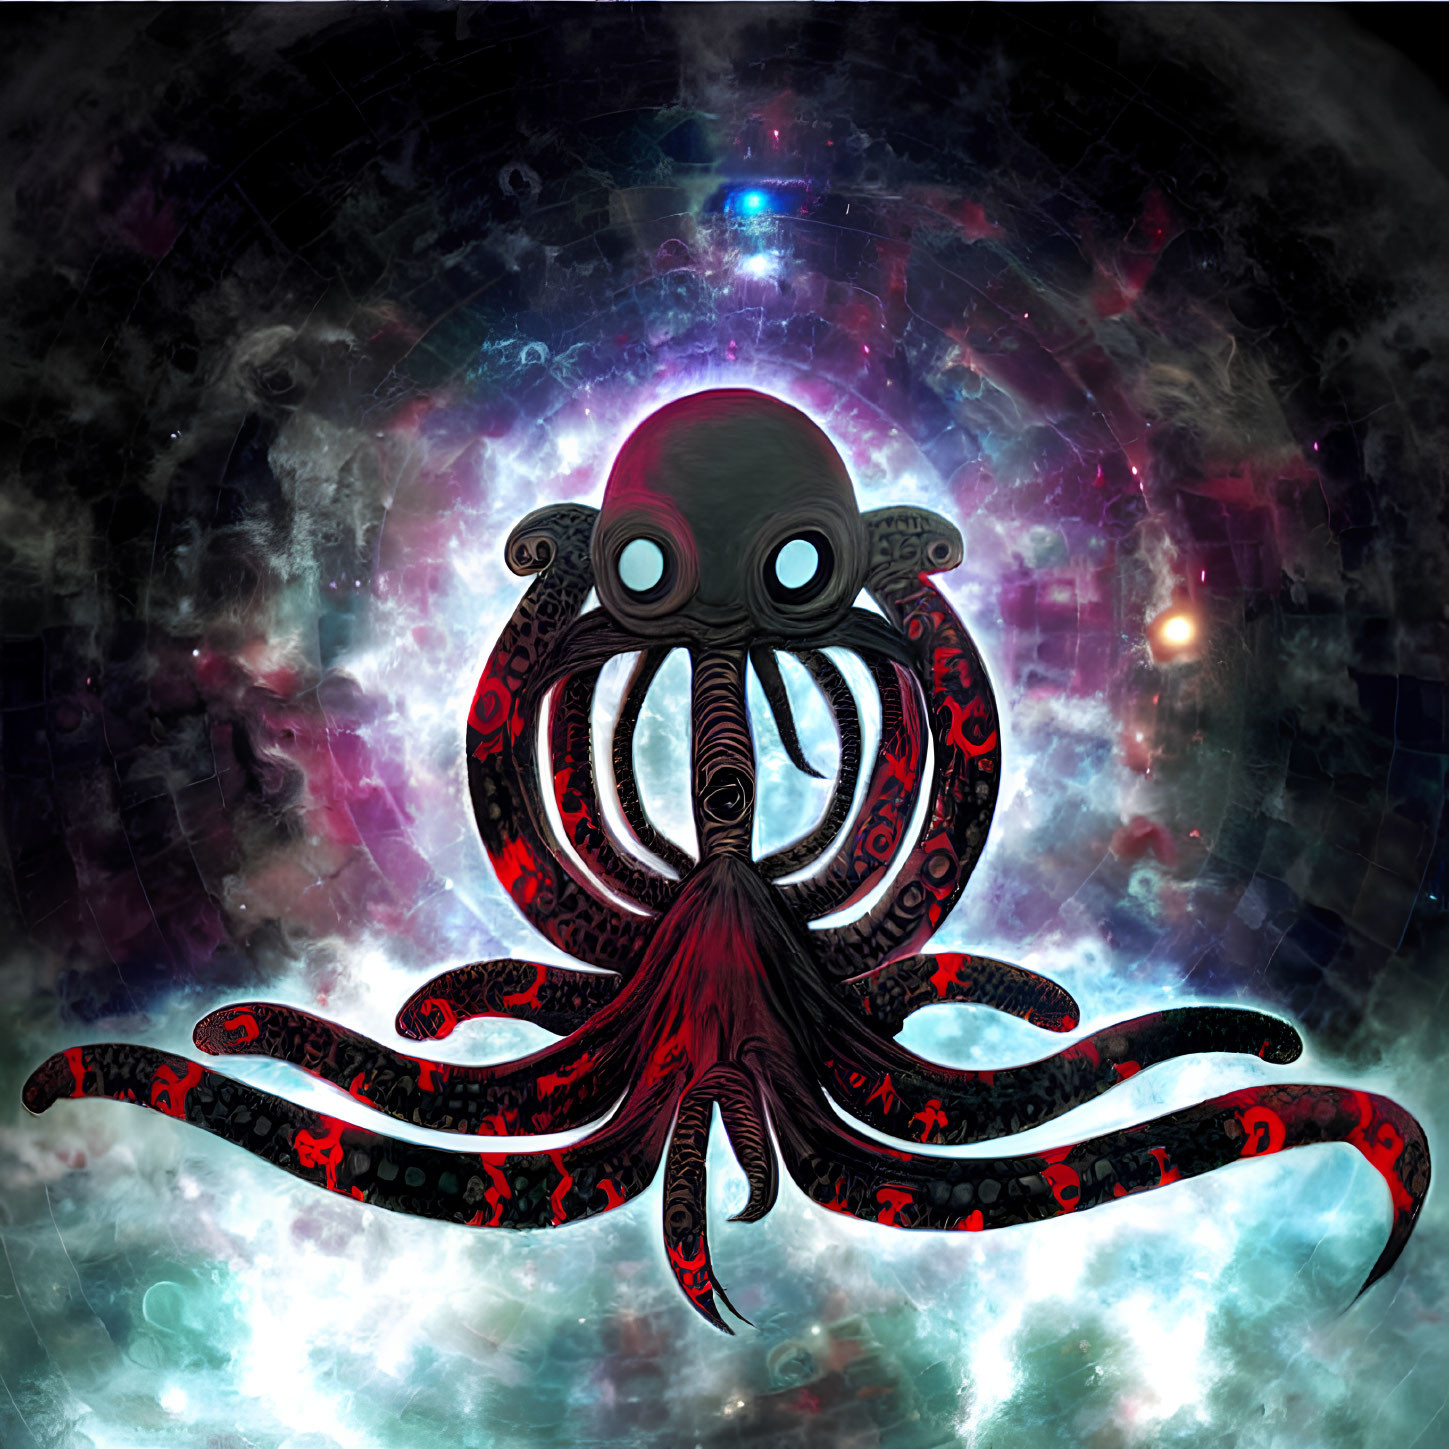 Glowing-eyed cosmic octopus in starfield with red patterns